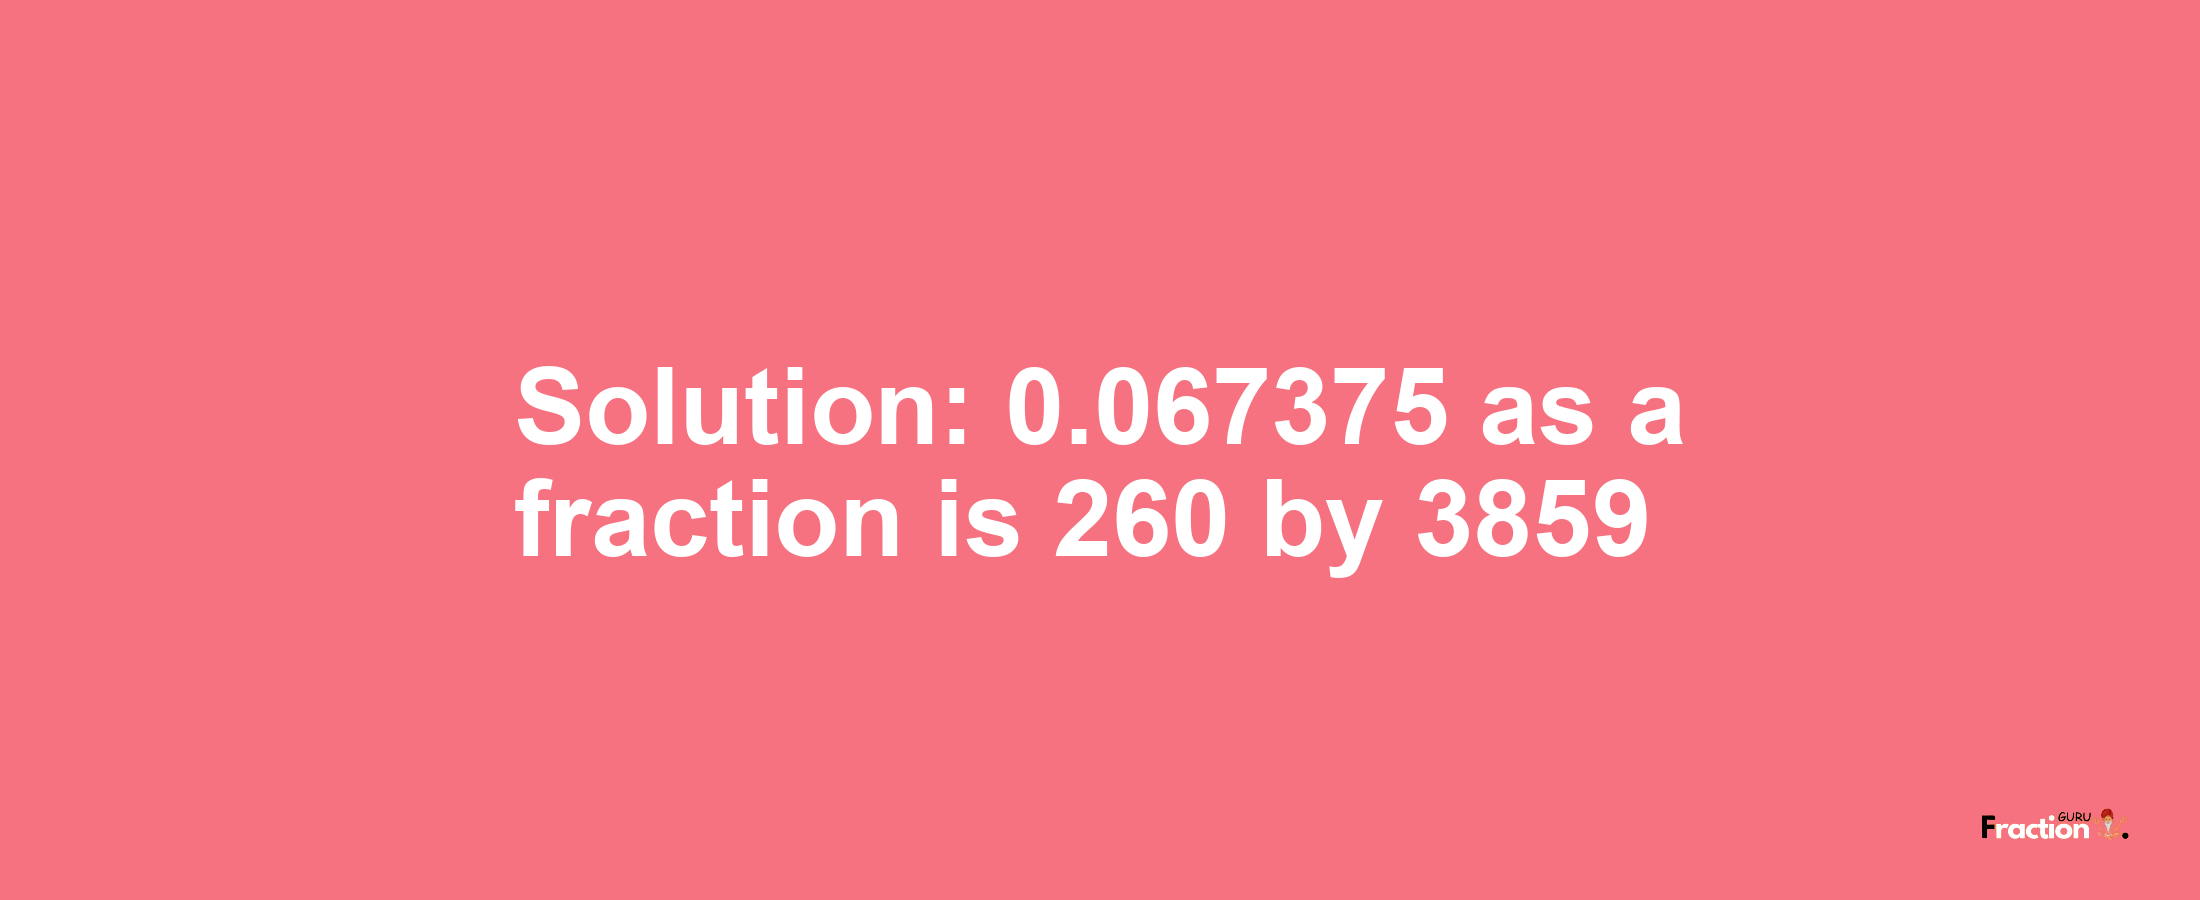 Solution:0.067375 as a fraction is 260/3859